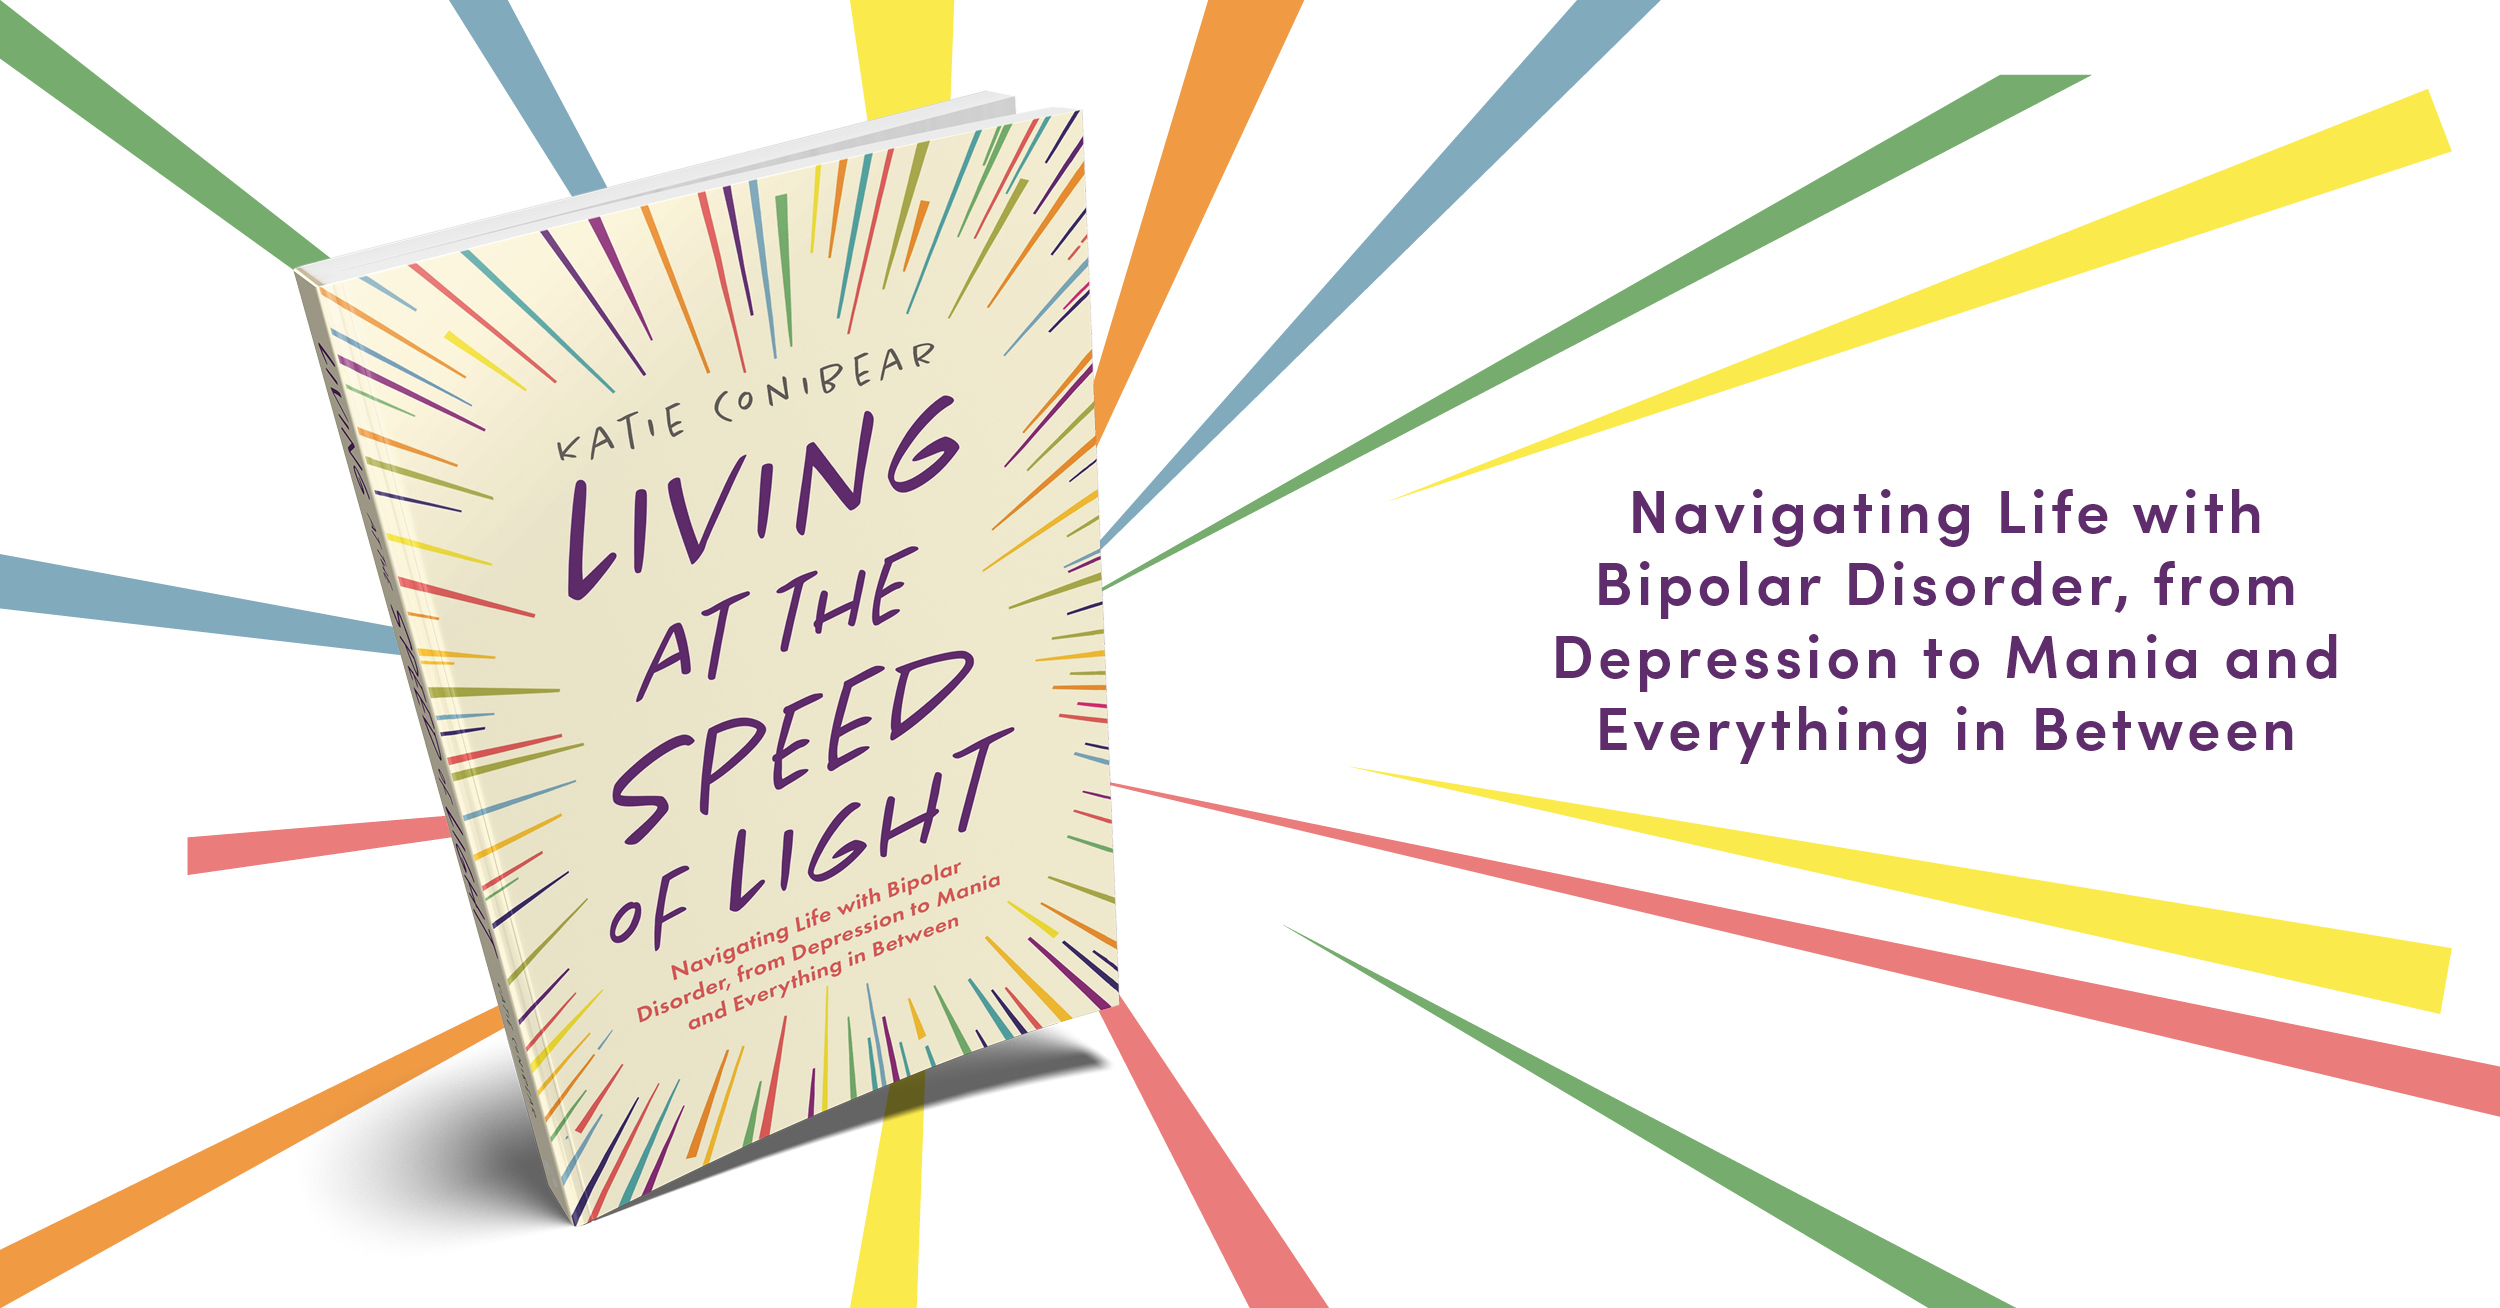 My first book, Living at the Speed of Light, is available to order now